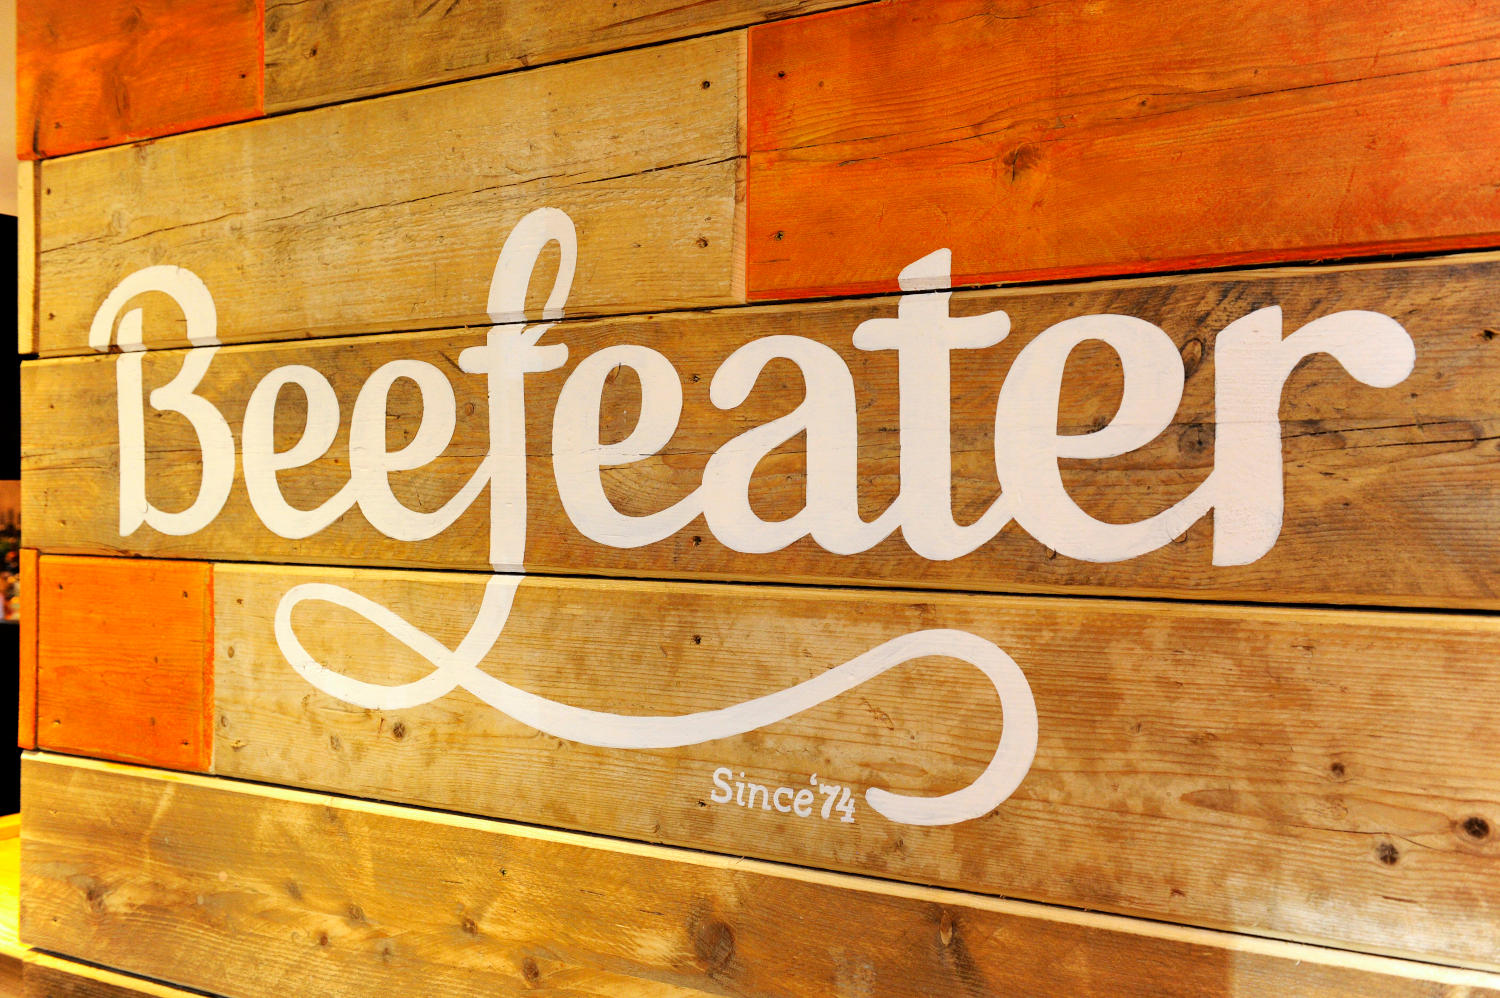 Beefeater Restaurant The Orchard Beefeater Evesham 01386 444300